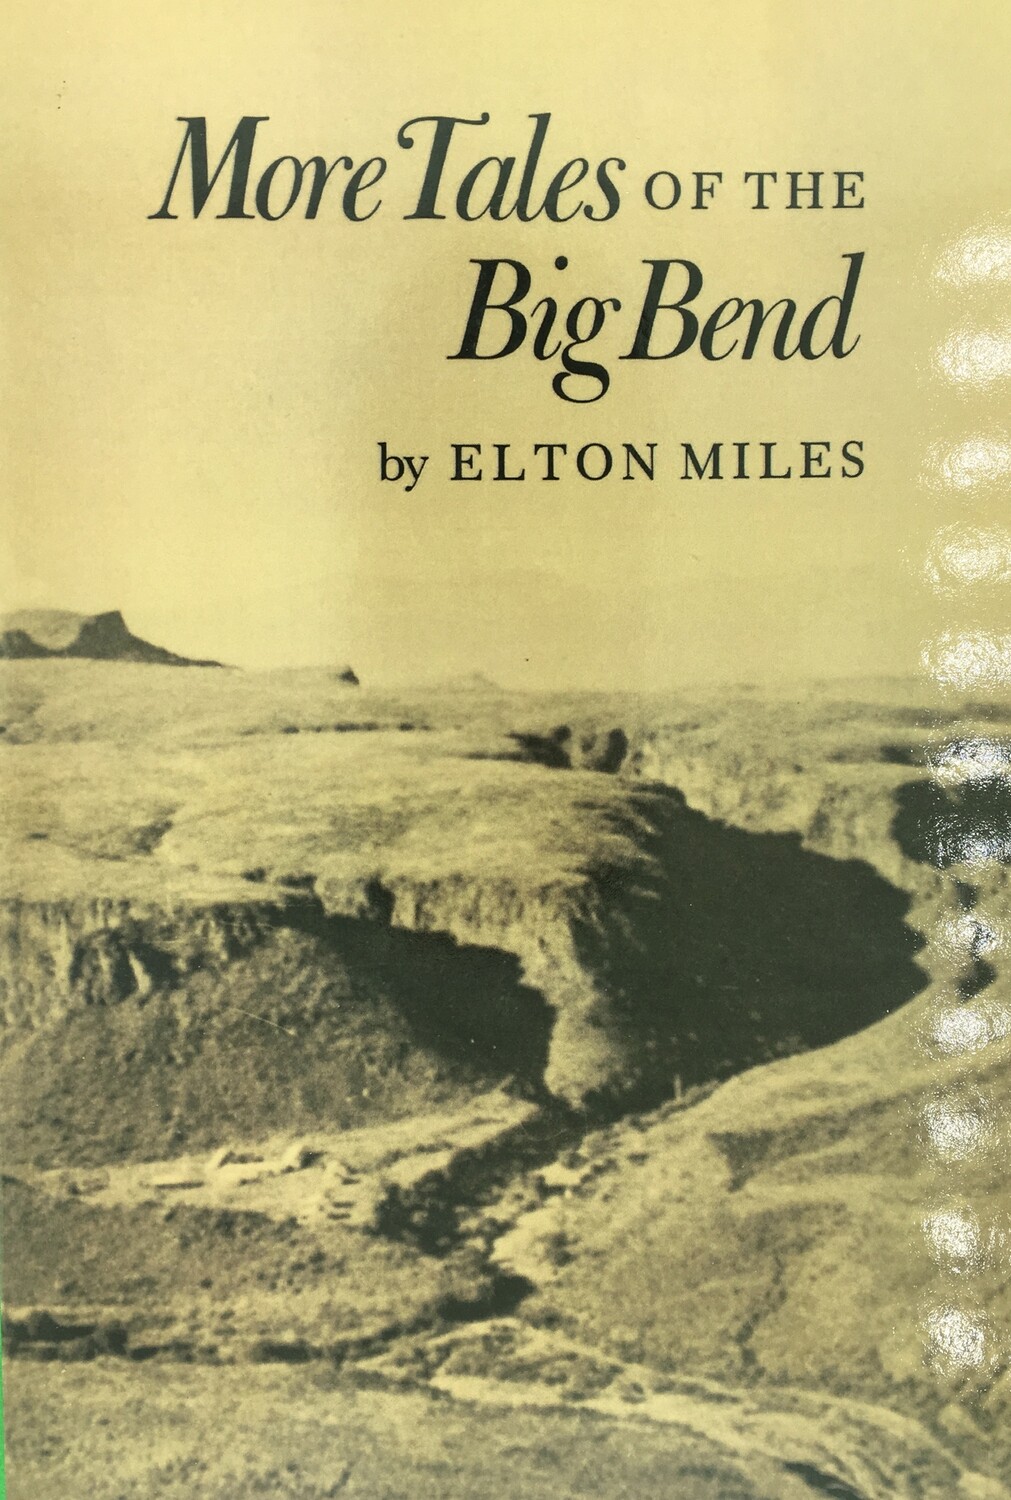 More Tales of the Big Bend